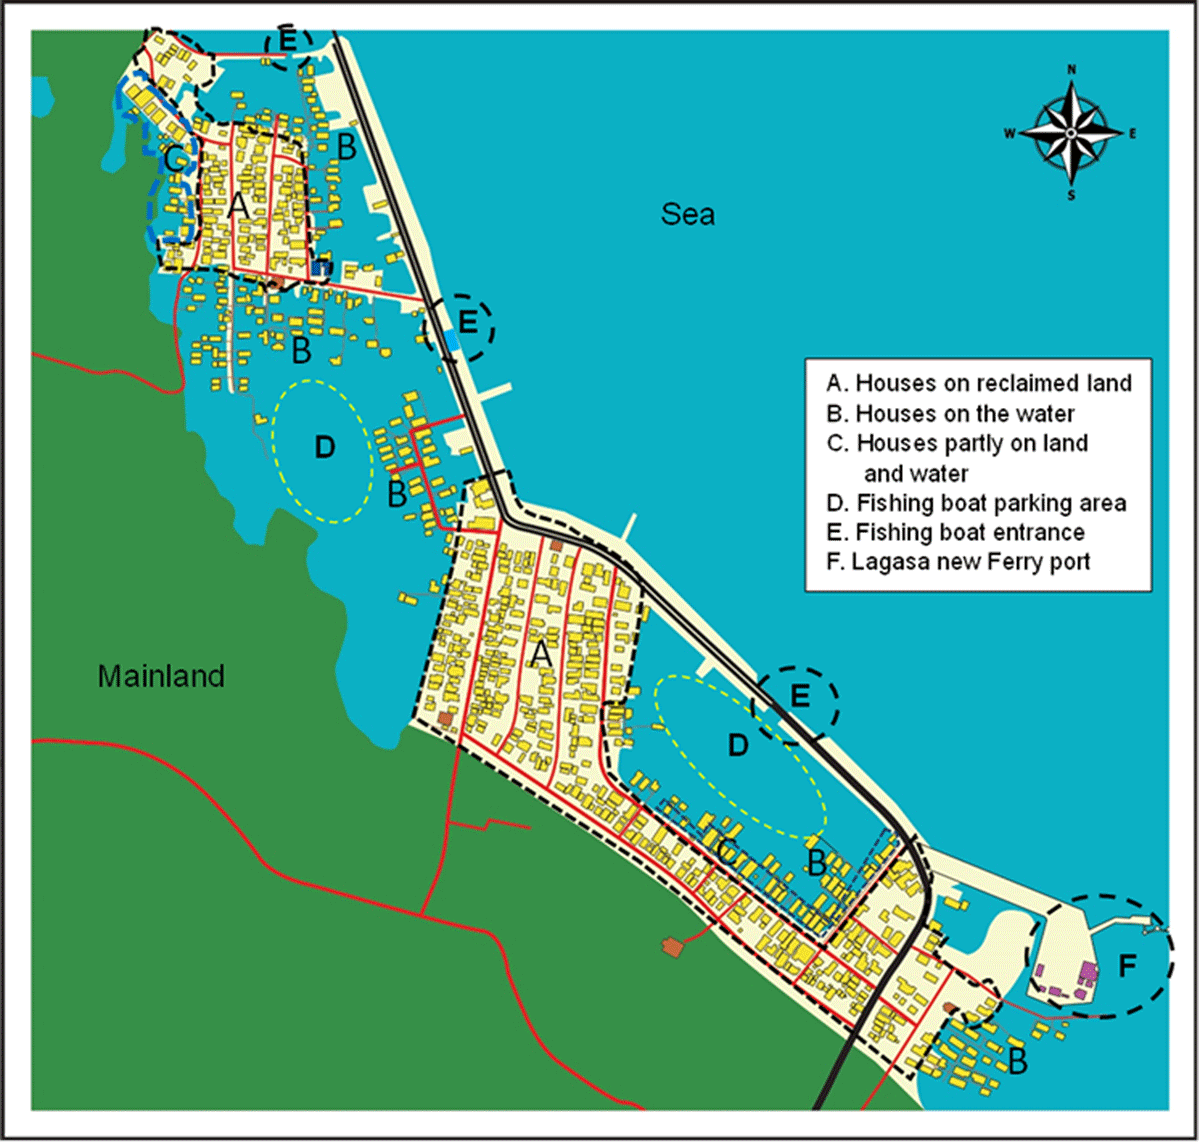 Zoning map of settlement space function